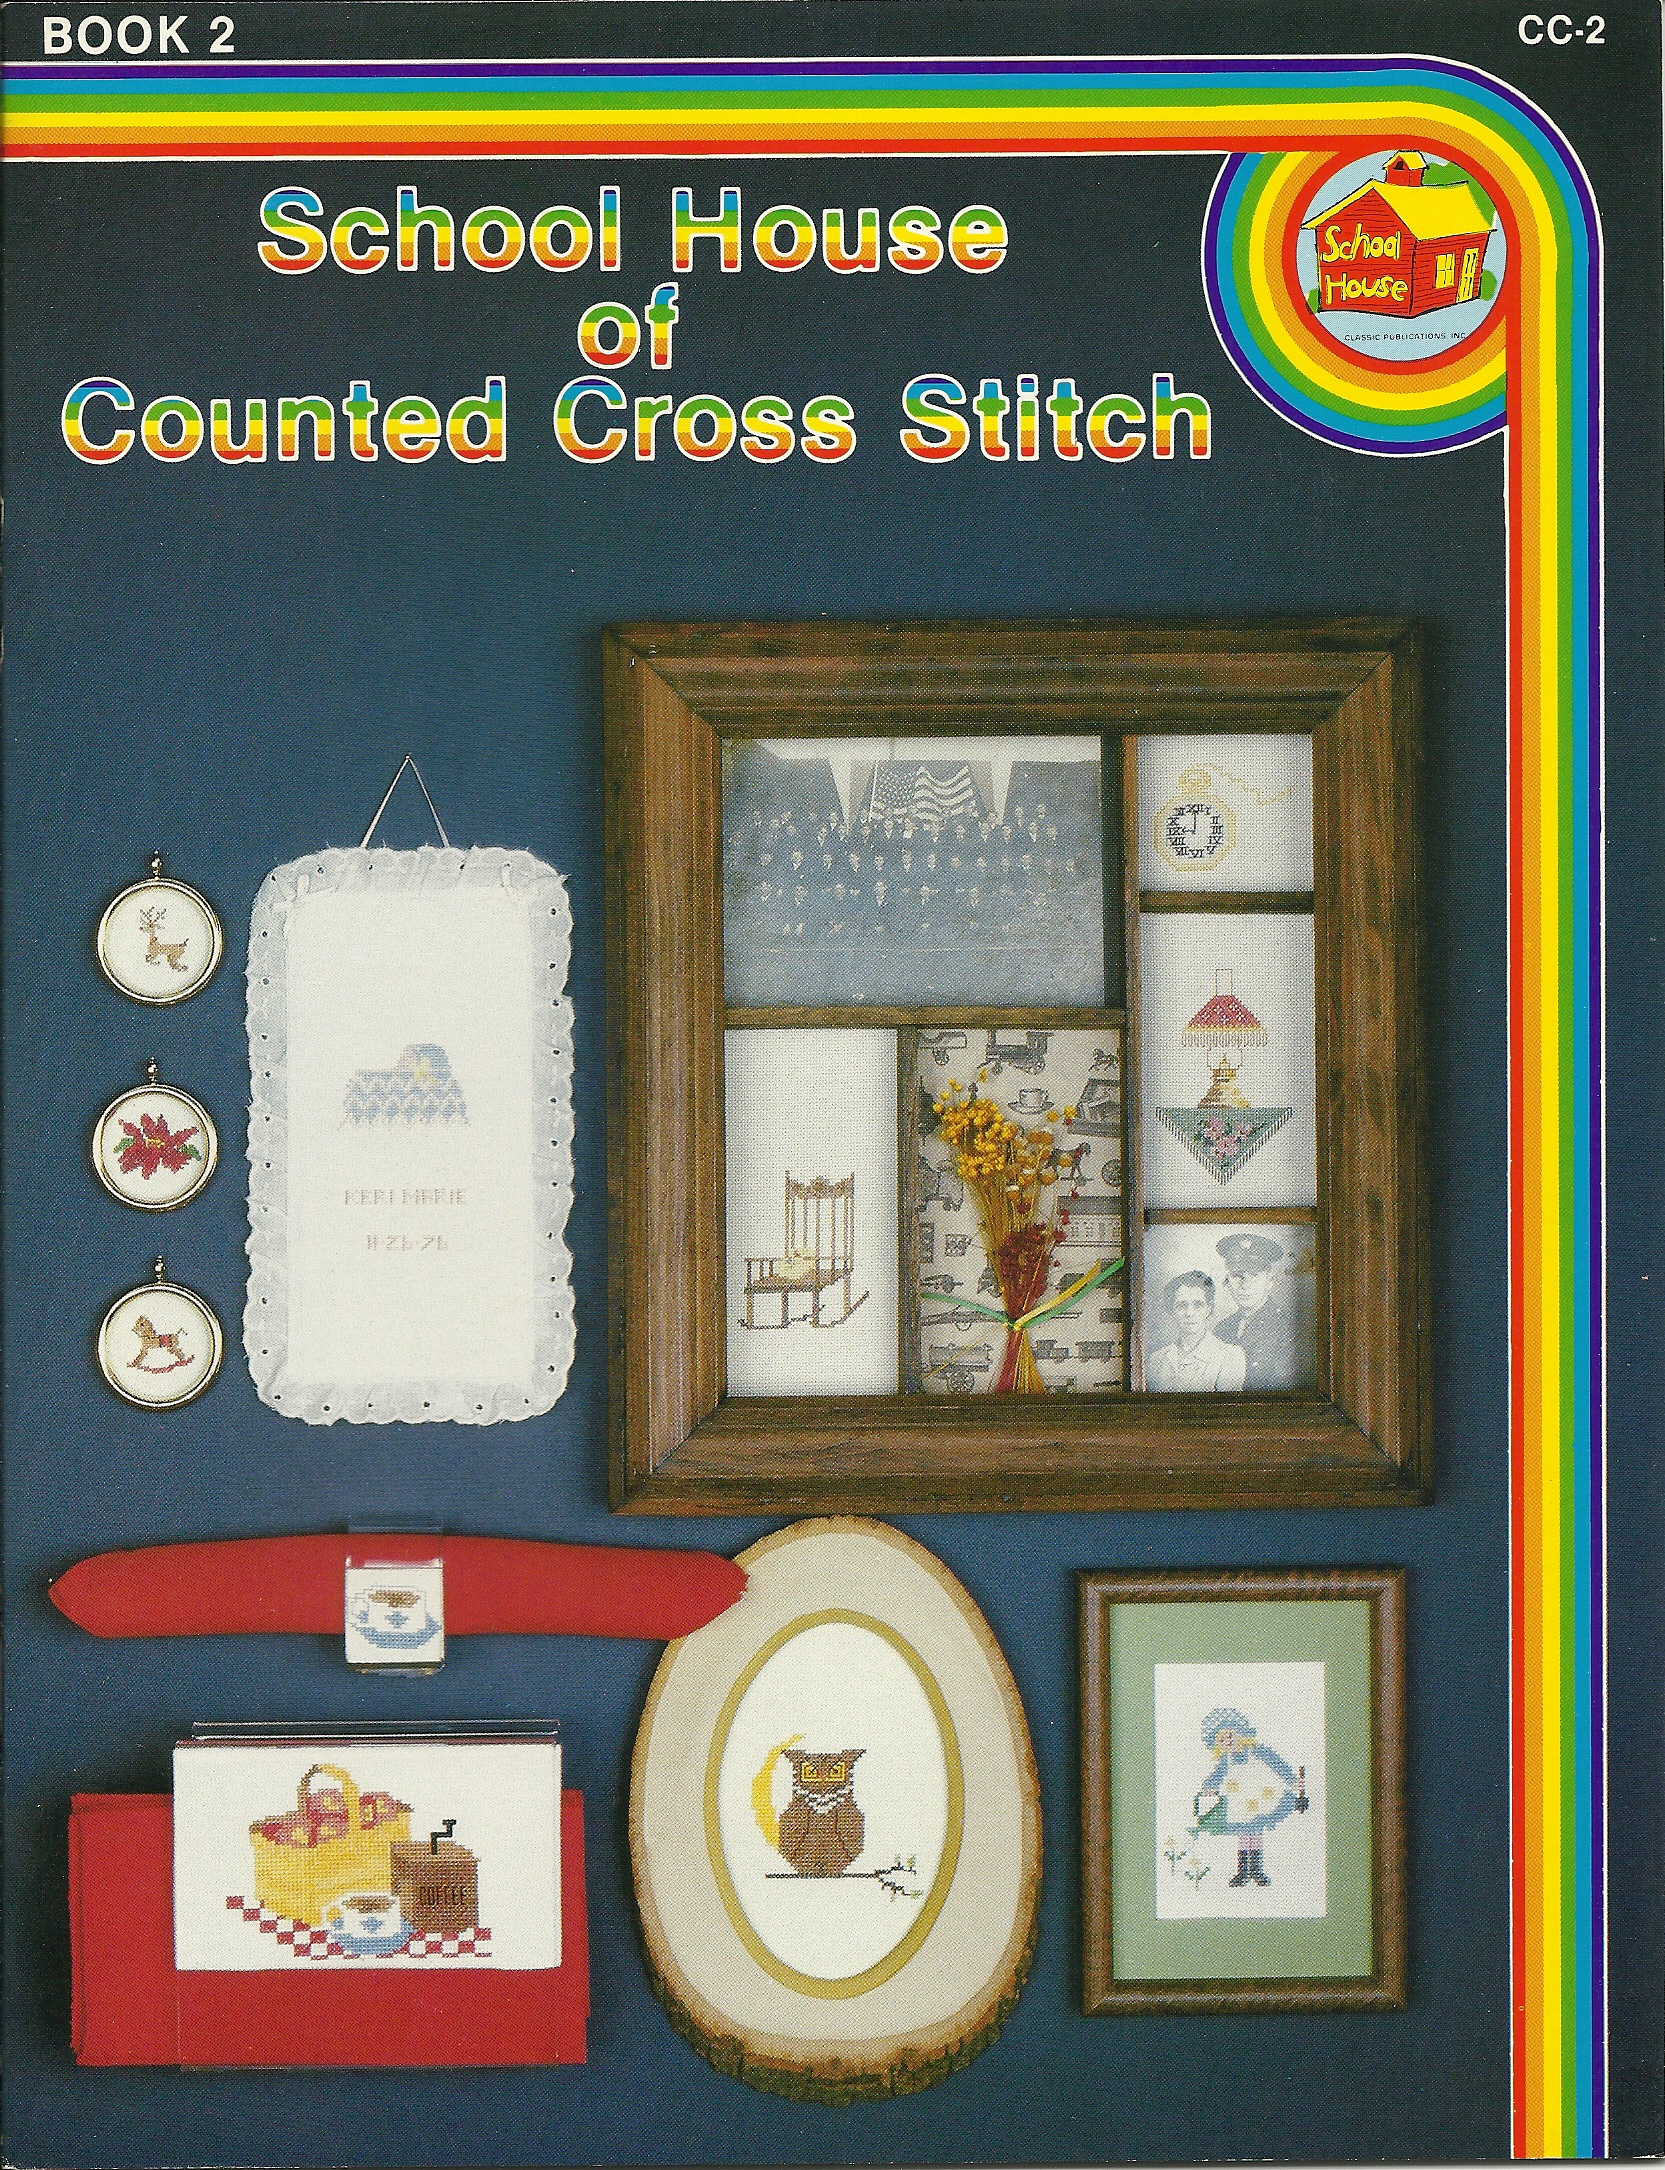 School House of Counted Cross Stitch  Book 2